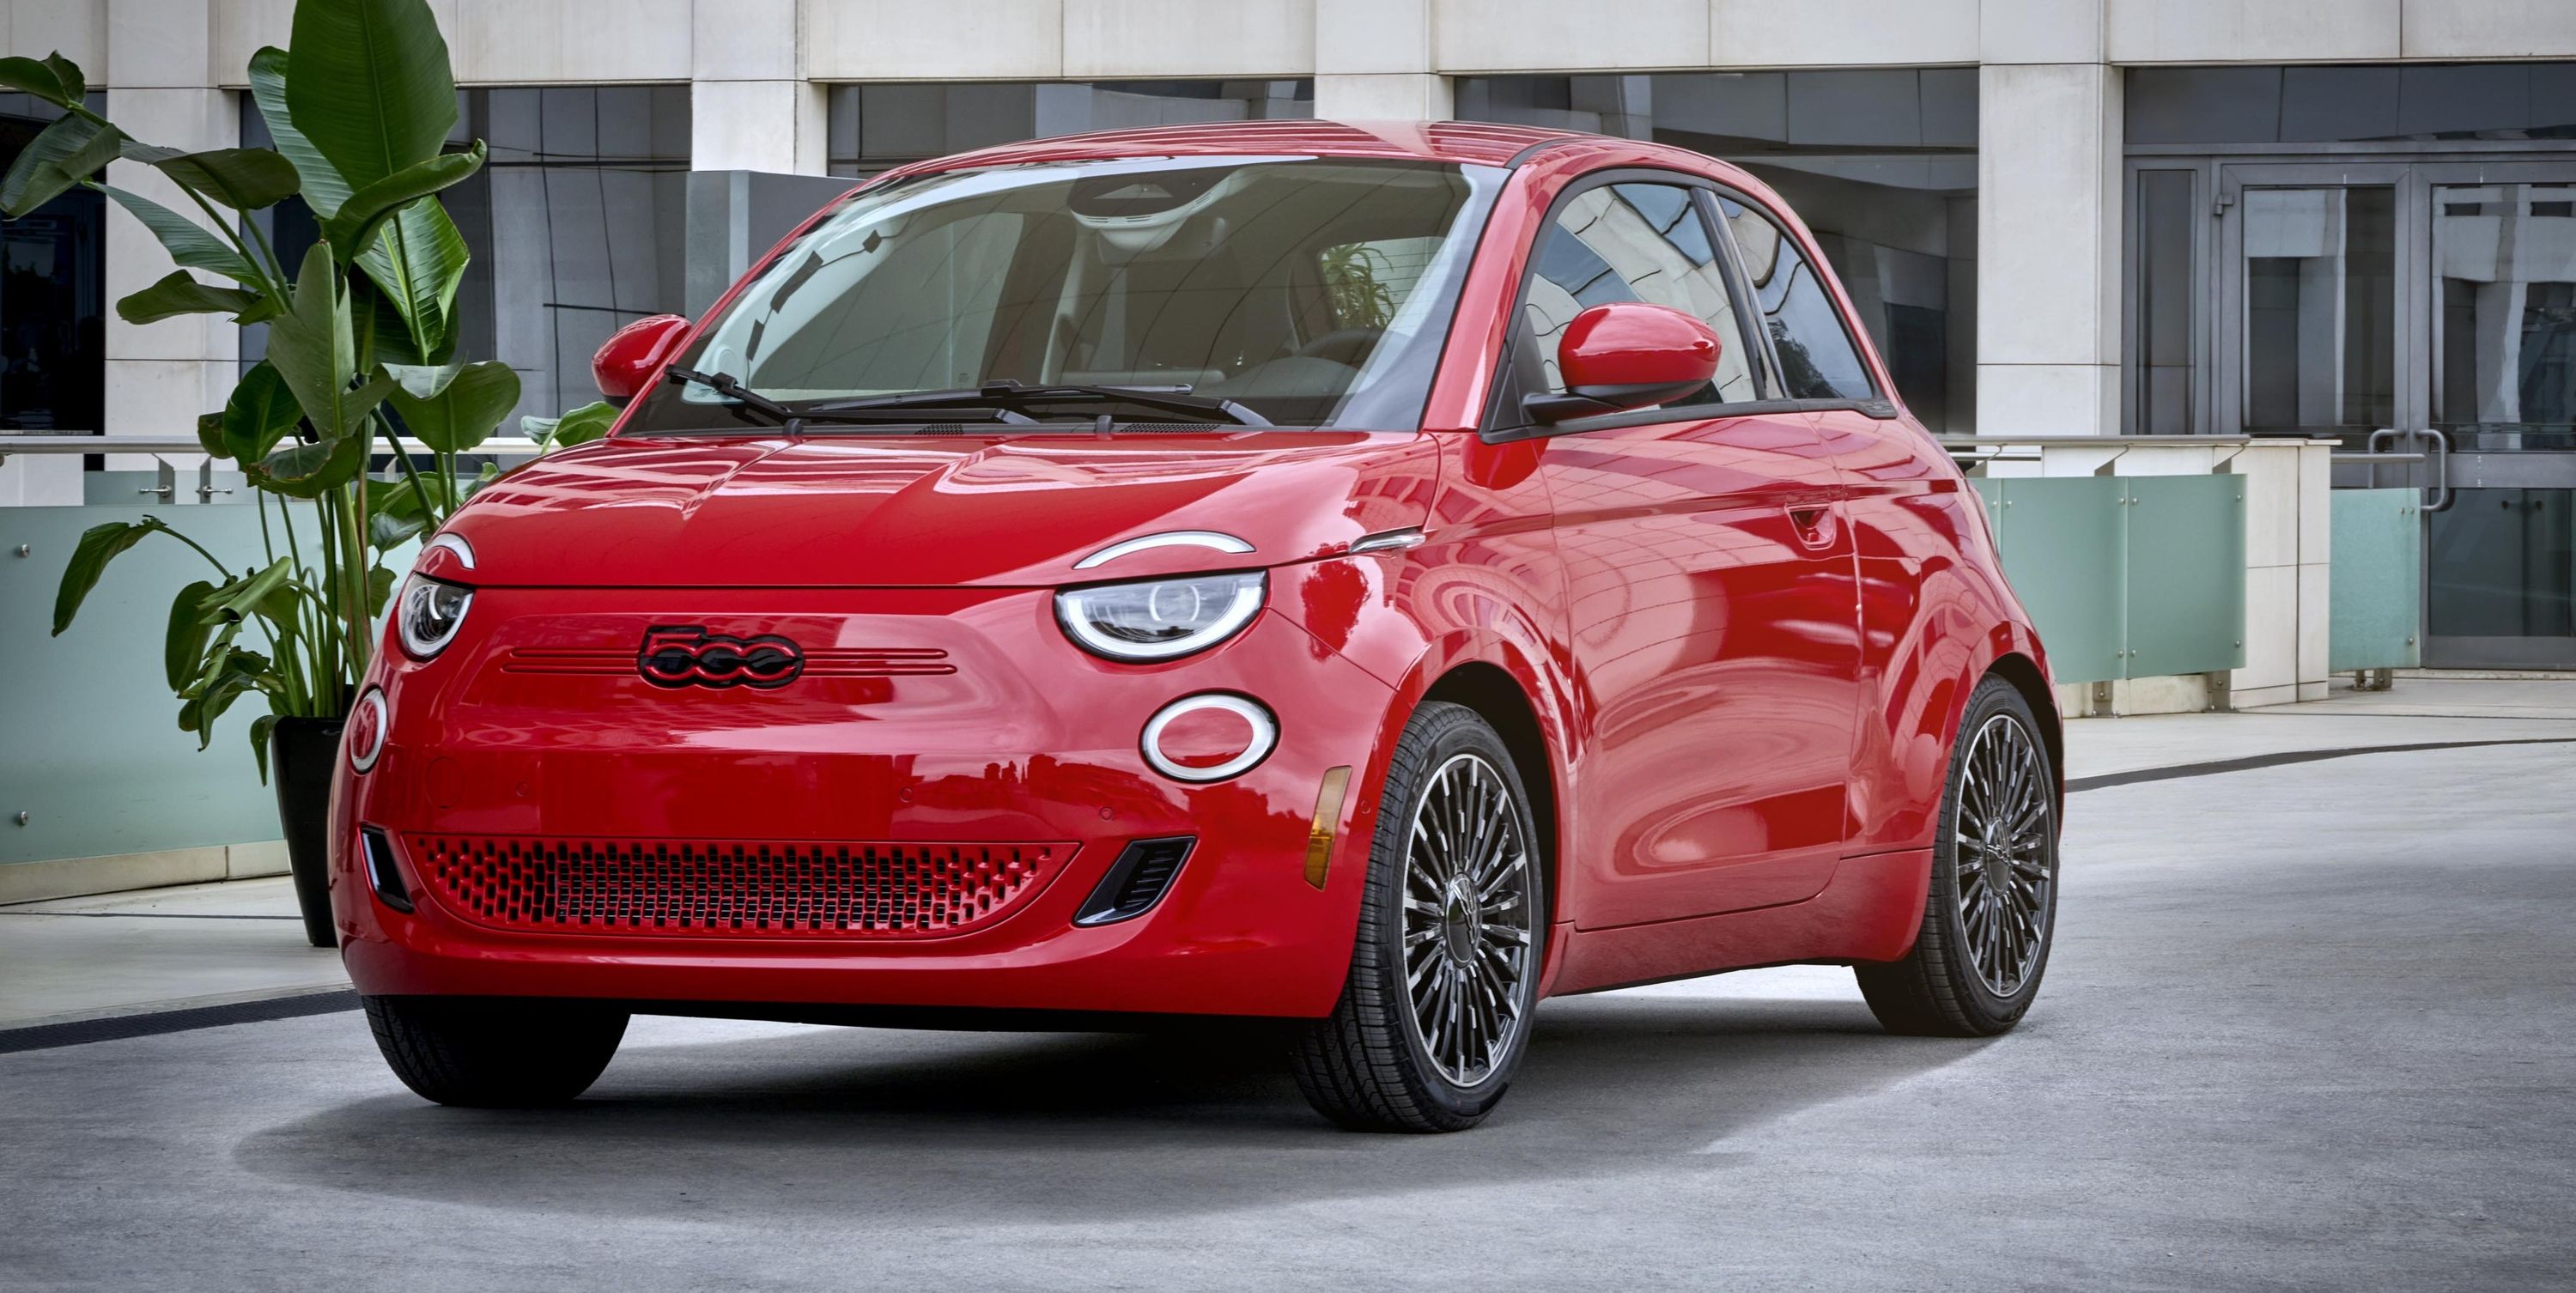 The Fiat 500 Returns to America as an Electric City Car